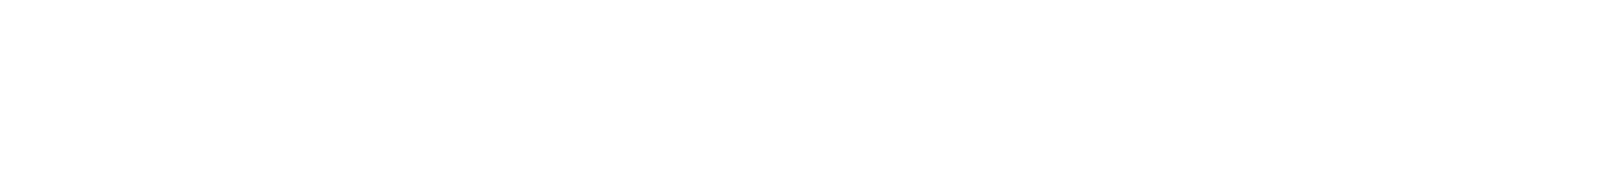 NWE Consulting Engineers